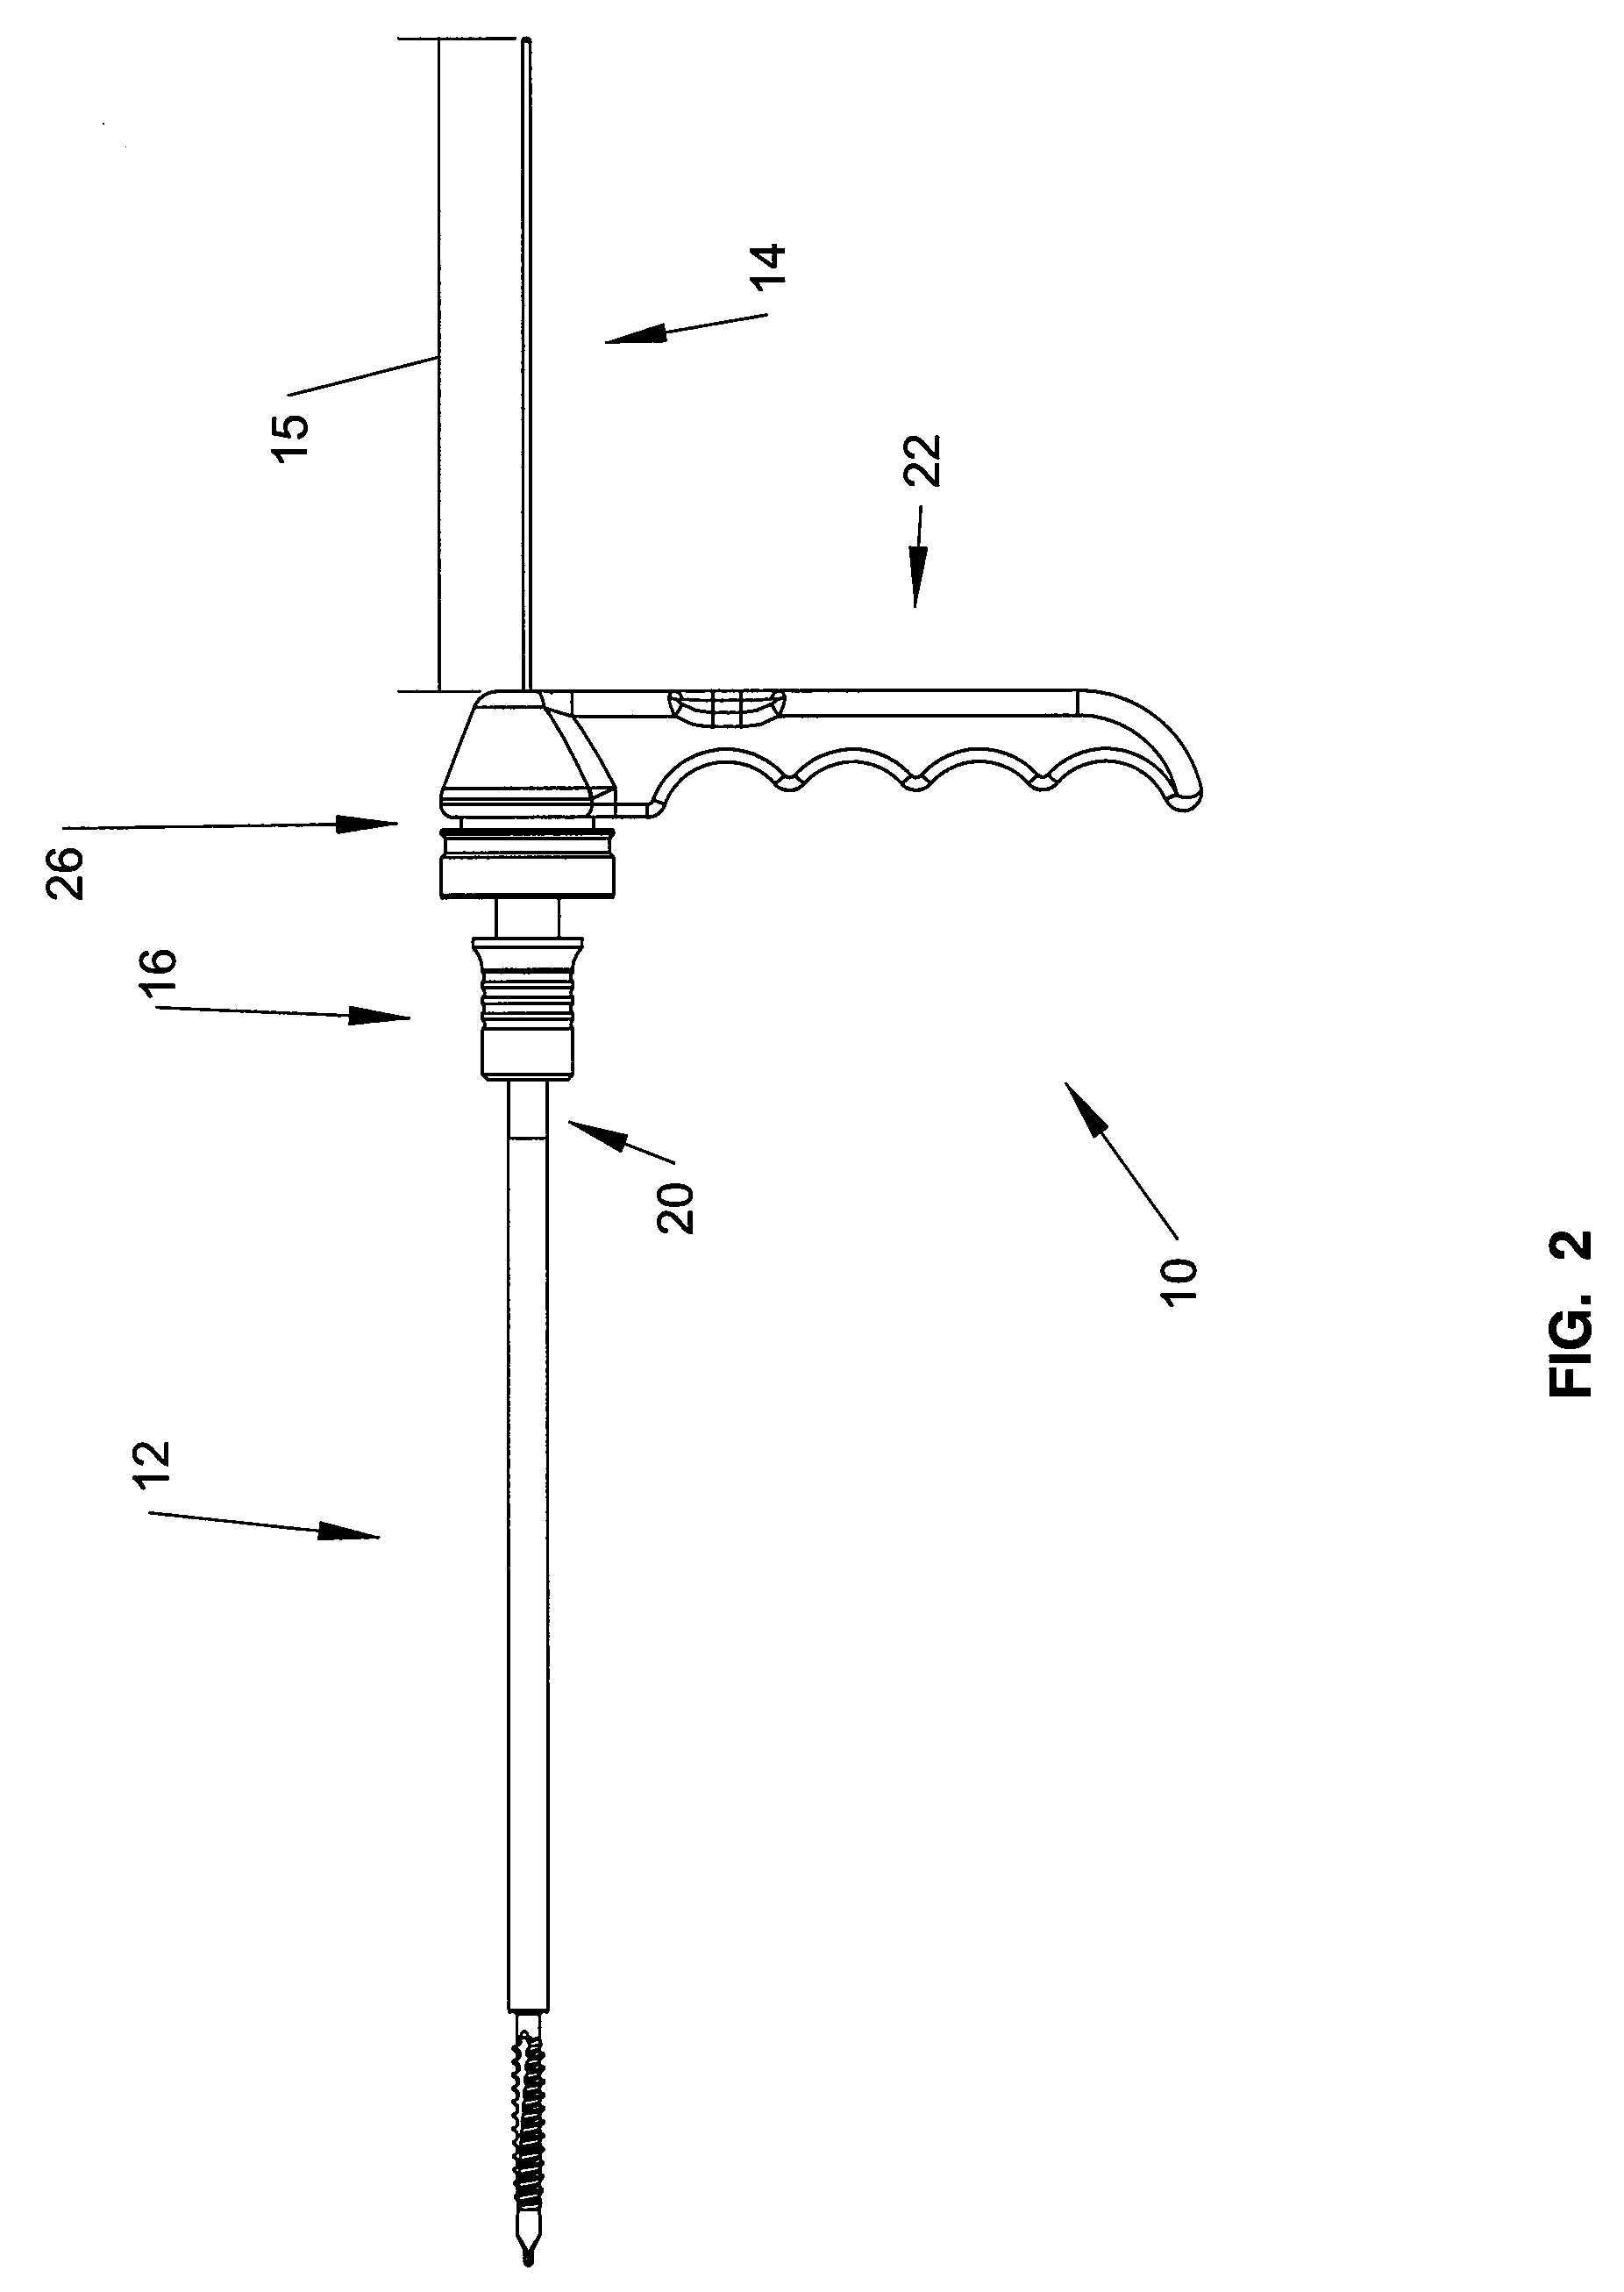 Ratcheting mechanical driver for cannulated surgical systems